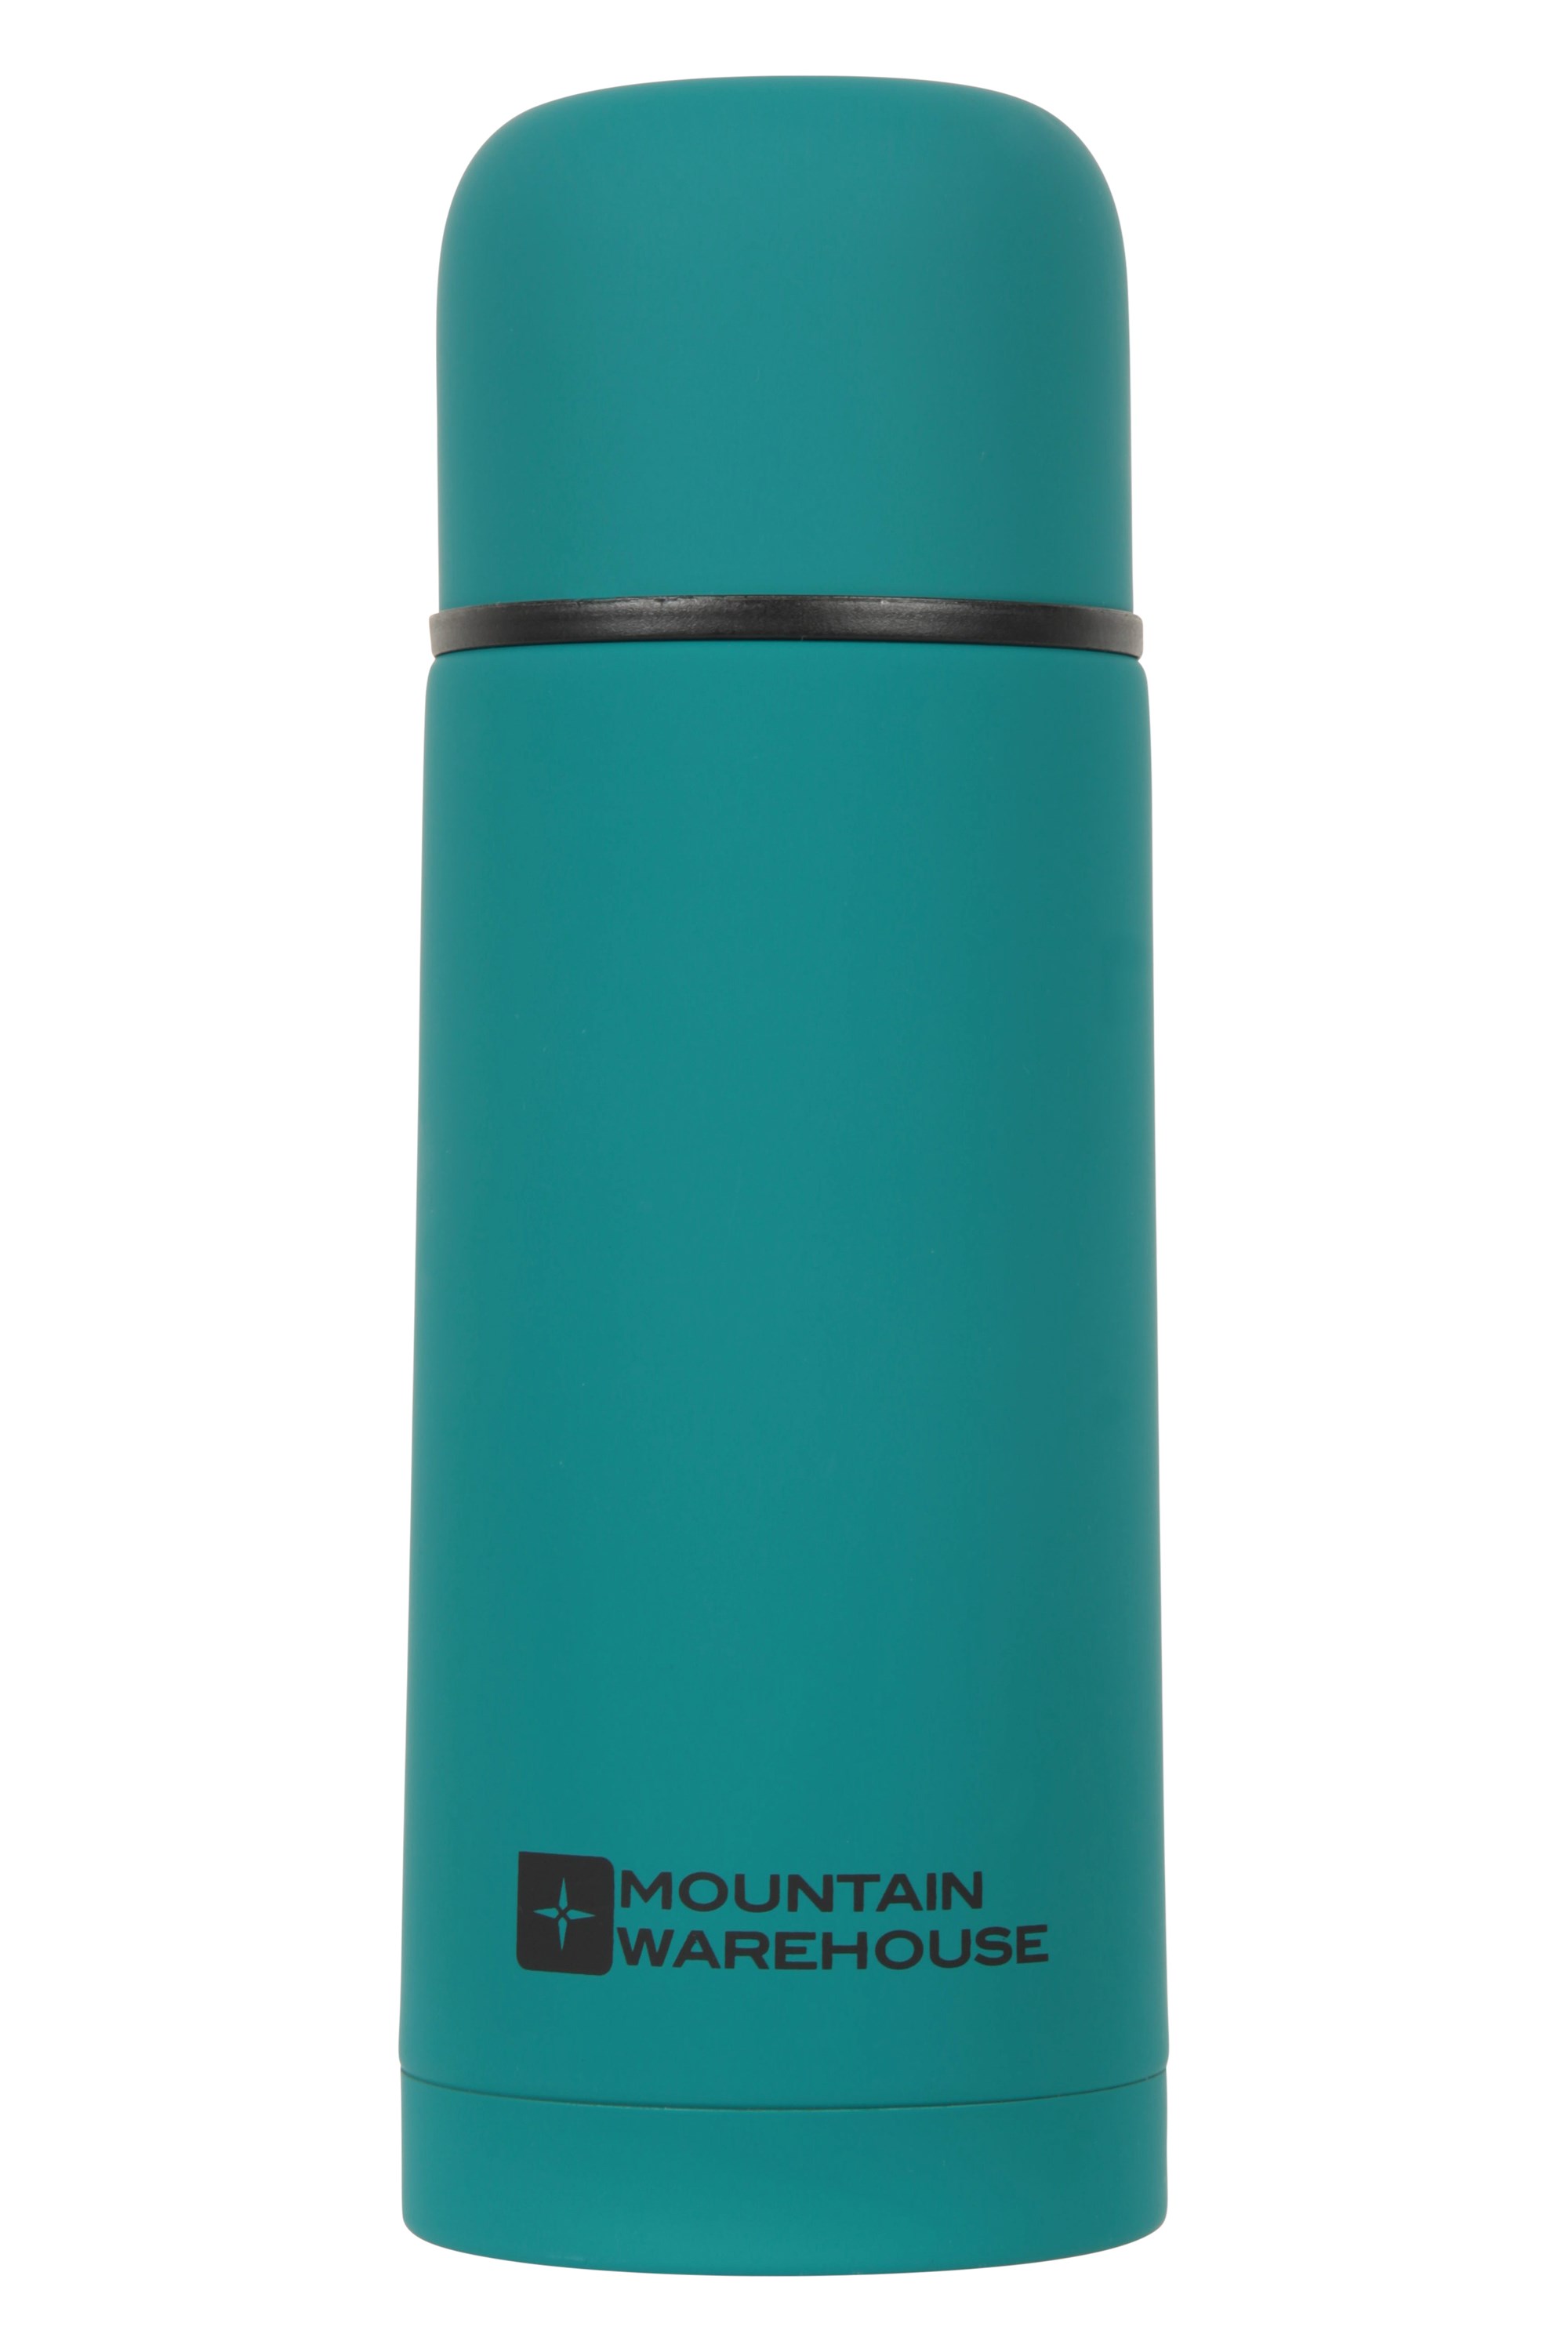 Double Walled Rubber Finish Flask - 350ml - Teal